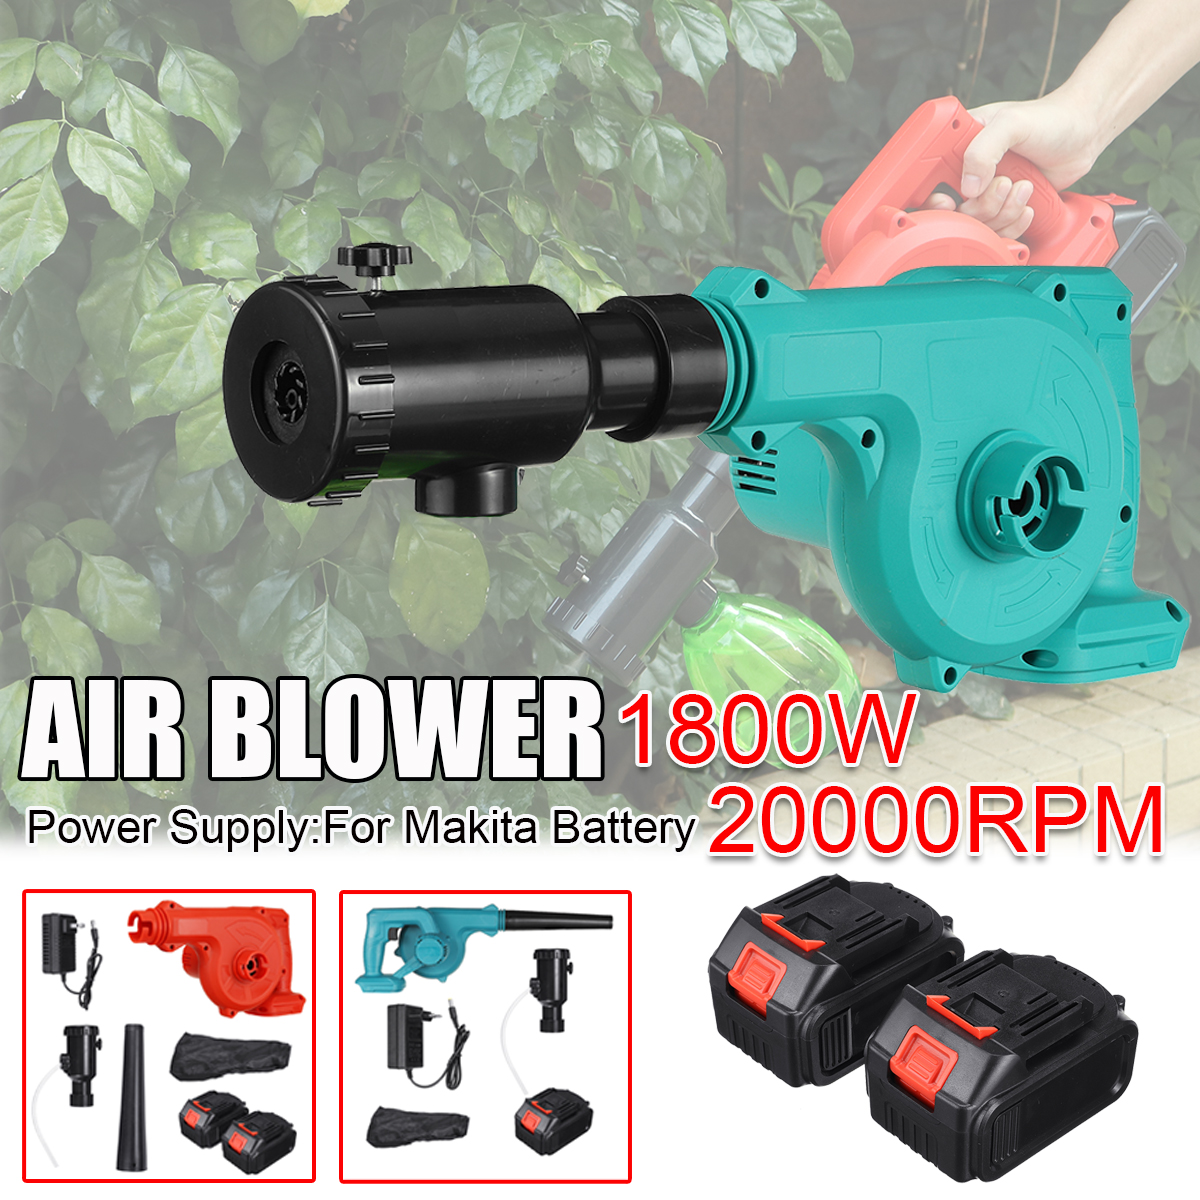 1800W-Portable-Cordless-Car-Washer-High-Pressure-Car-Household-Washer-Cleaner-Guns-Pumps-Tools-Fit-M-1912132-3